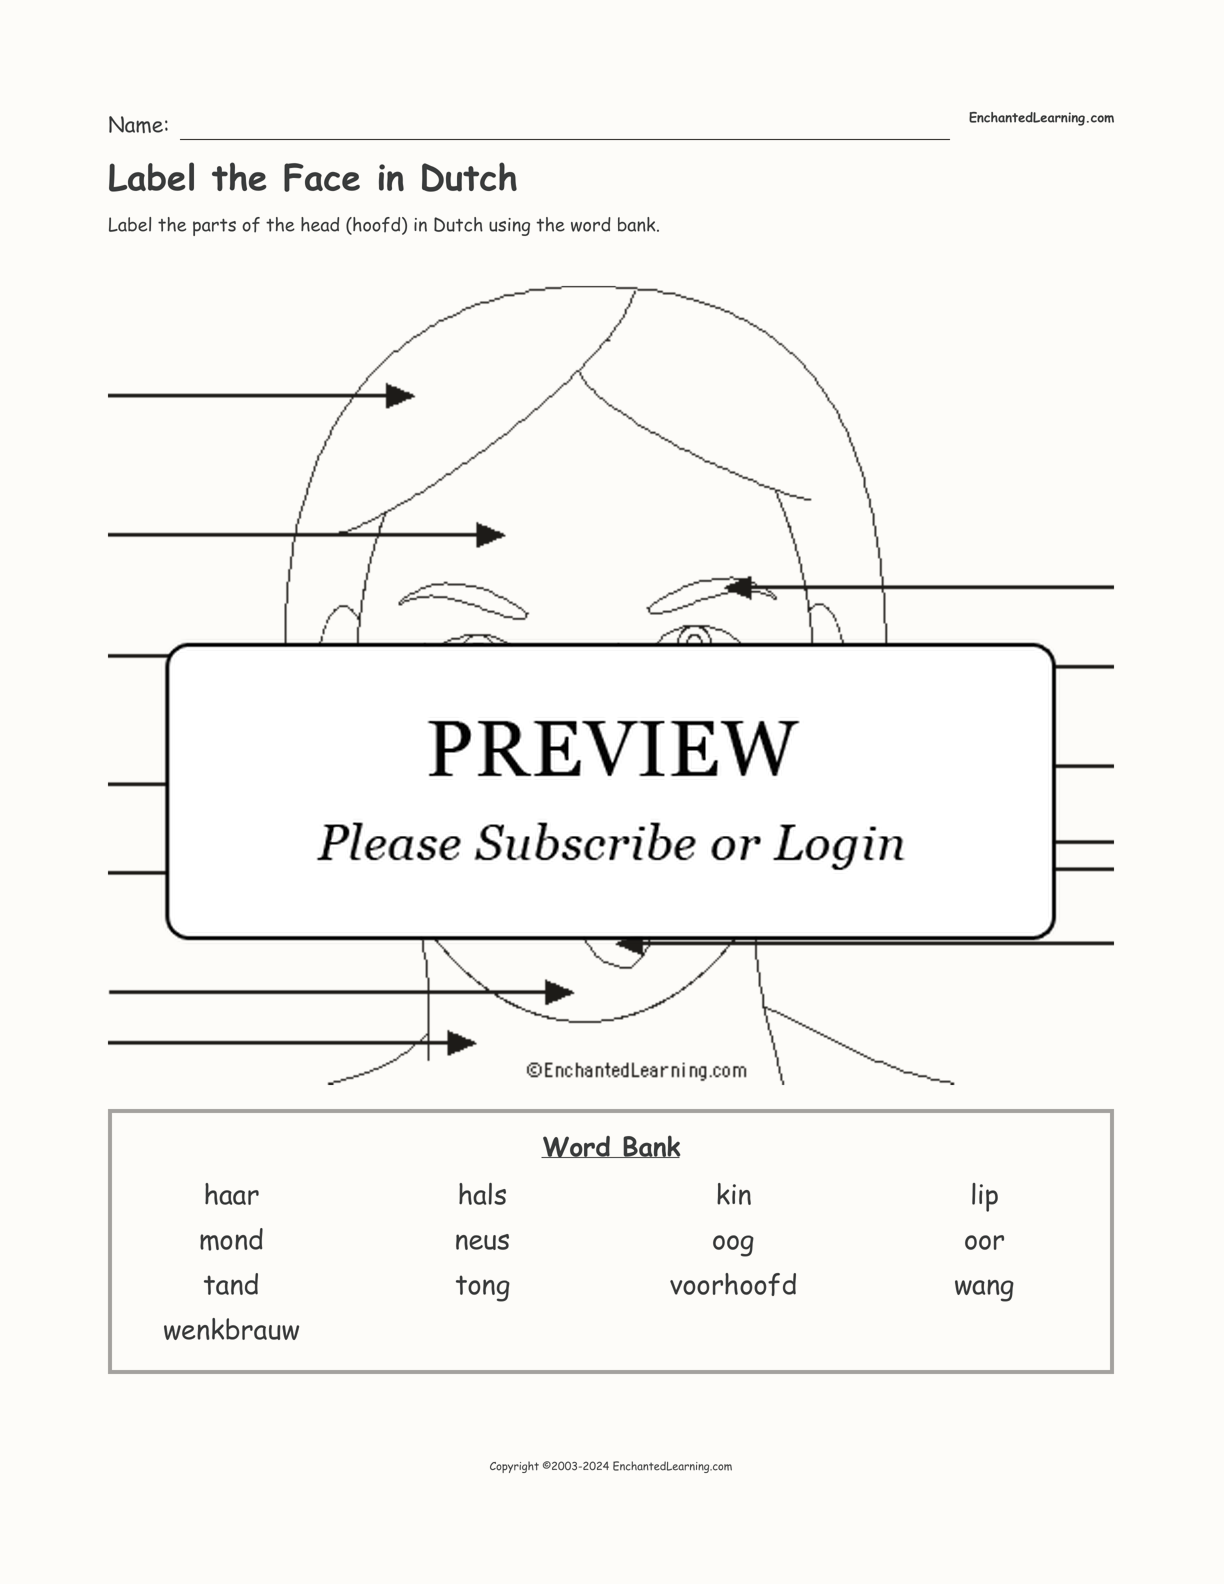 Label the Face in Dutch interactive worksheet page 1